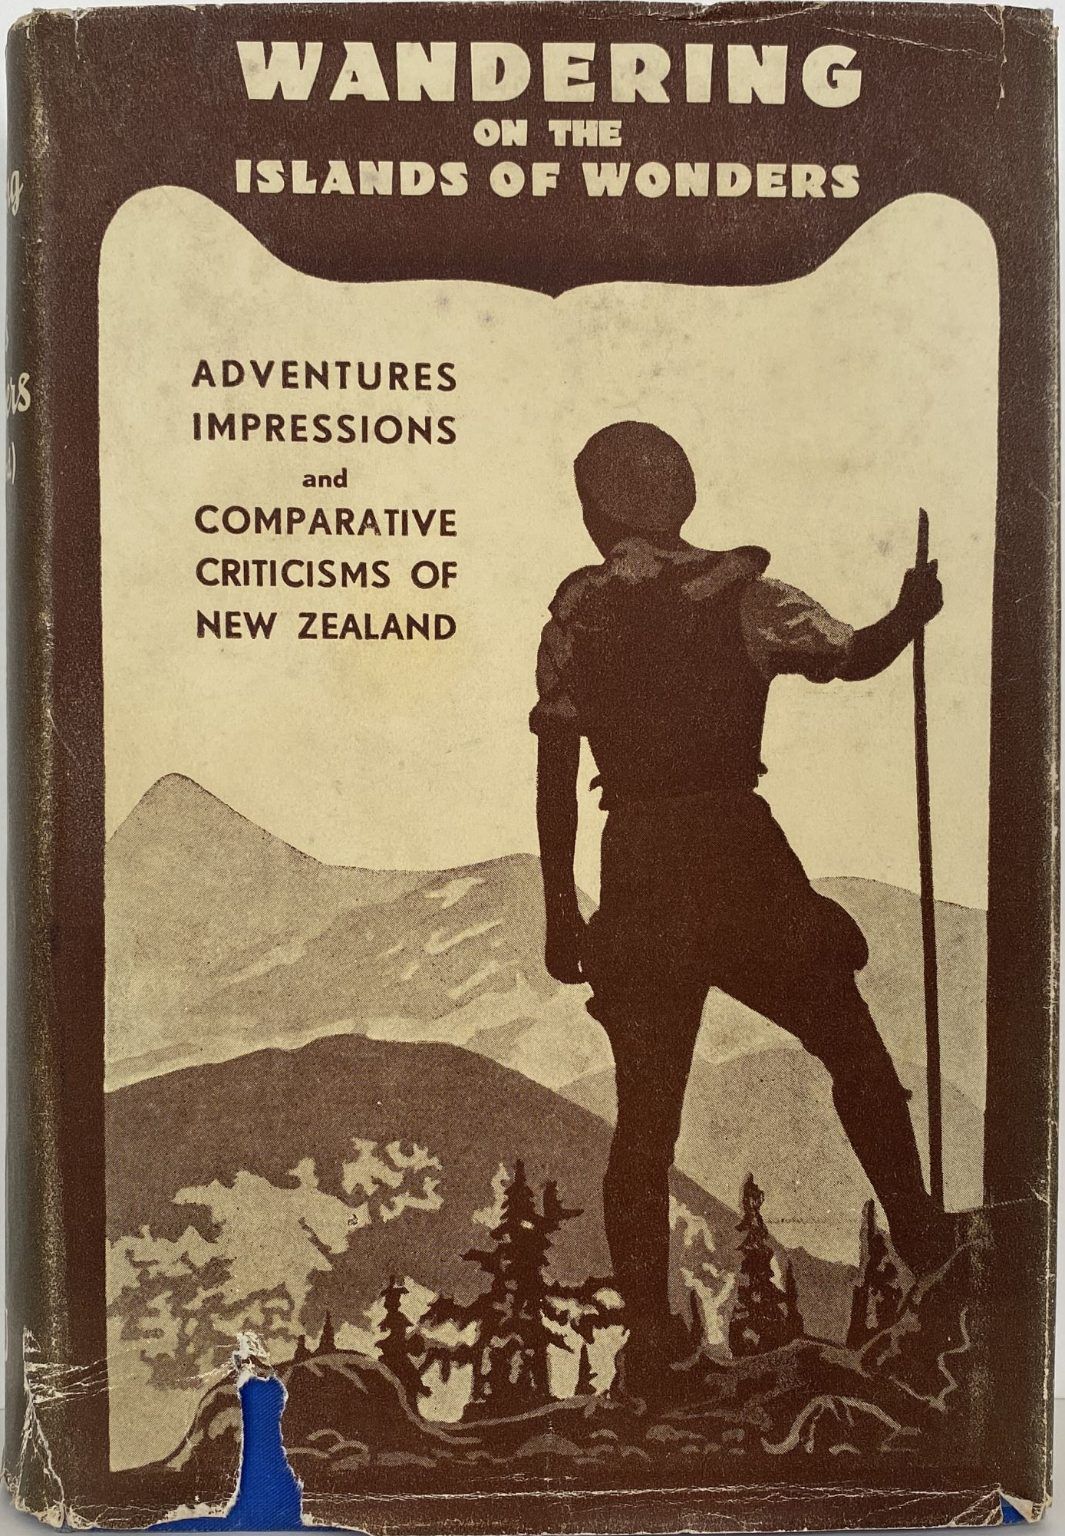 WANDERING ON THE ISLANDS OF WONDERS: Adventures impressions and comparative criticisms of NZ